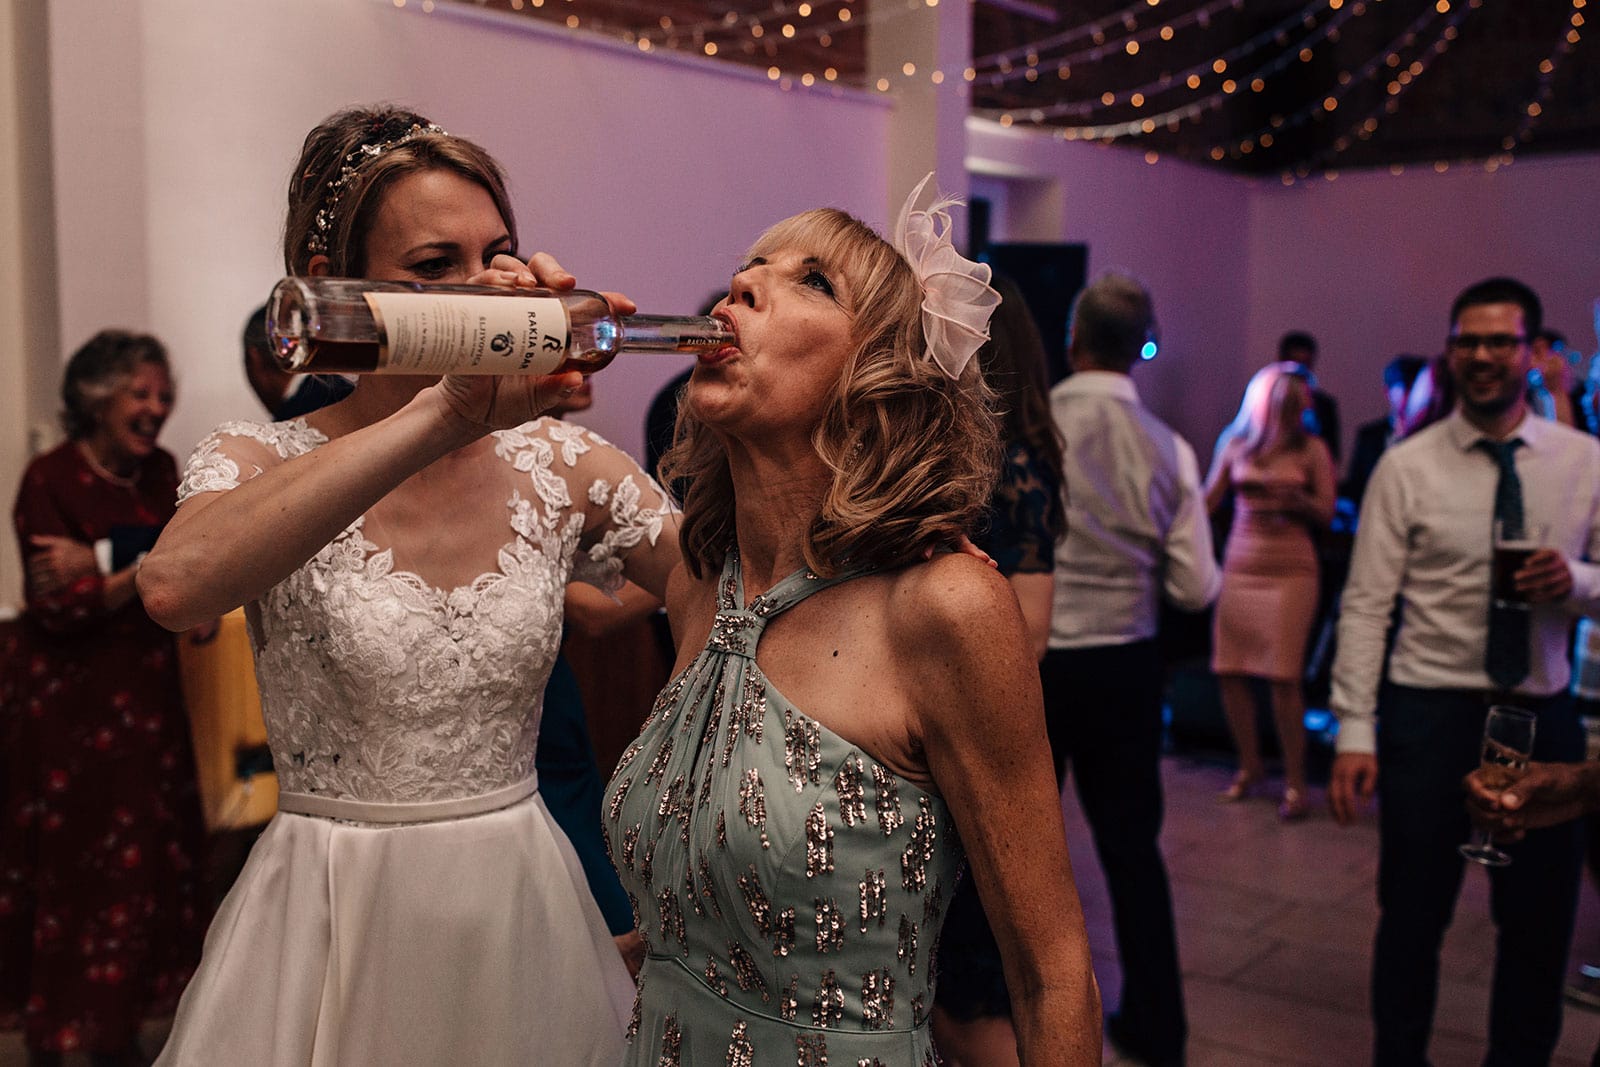 Lively and fun wedding photography of the Bride pouring a bottle of drink into her mothers mouth on the wedding dance-floor